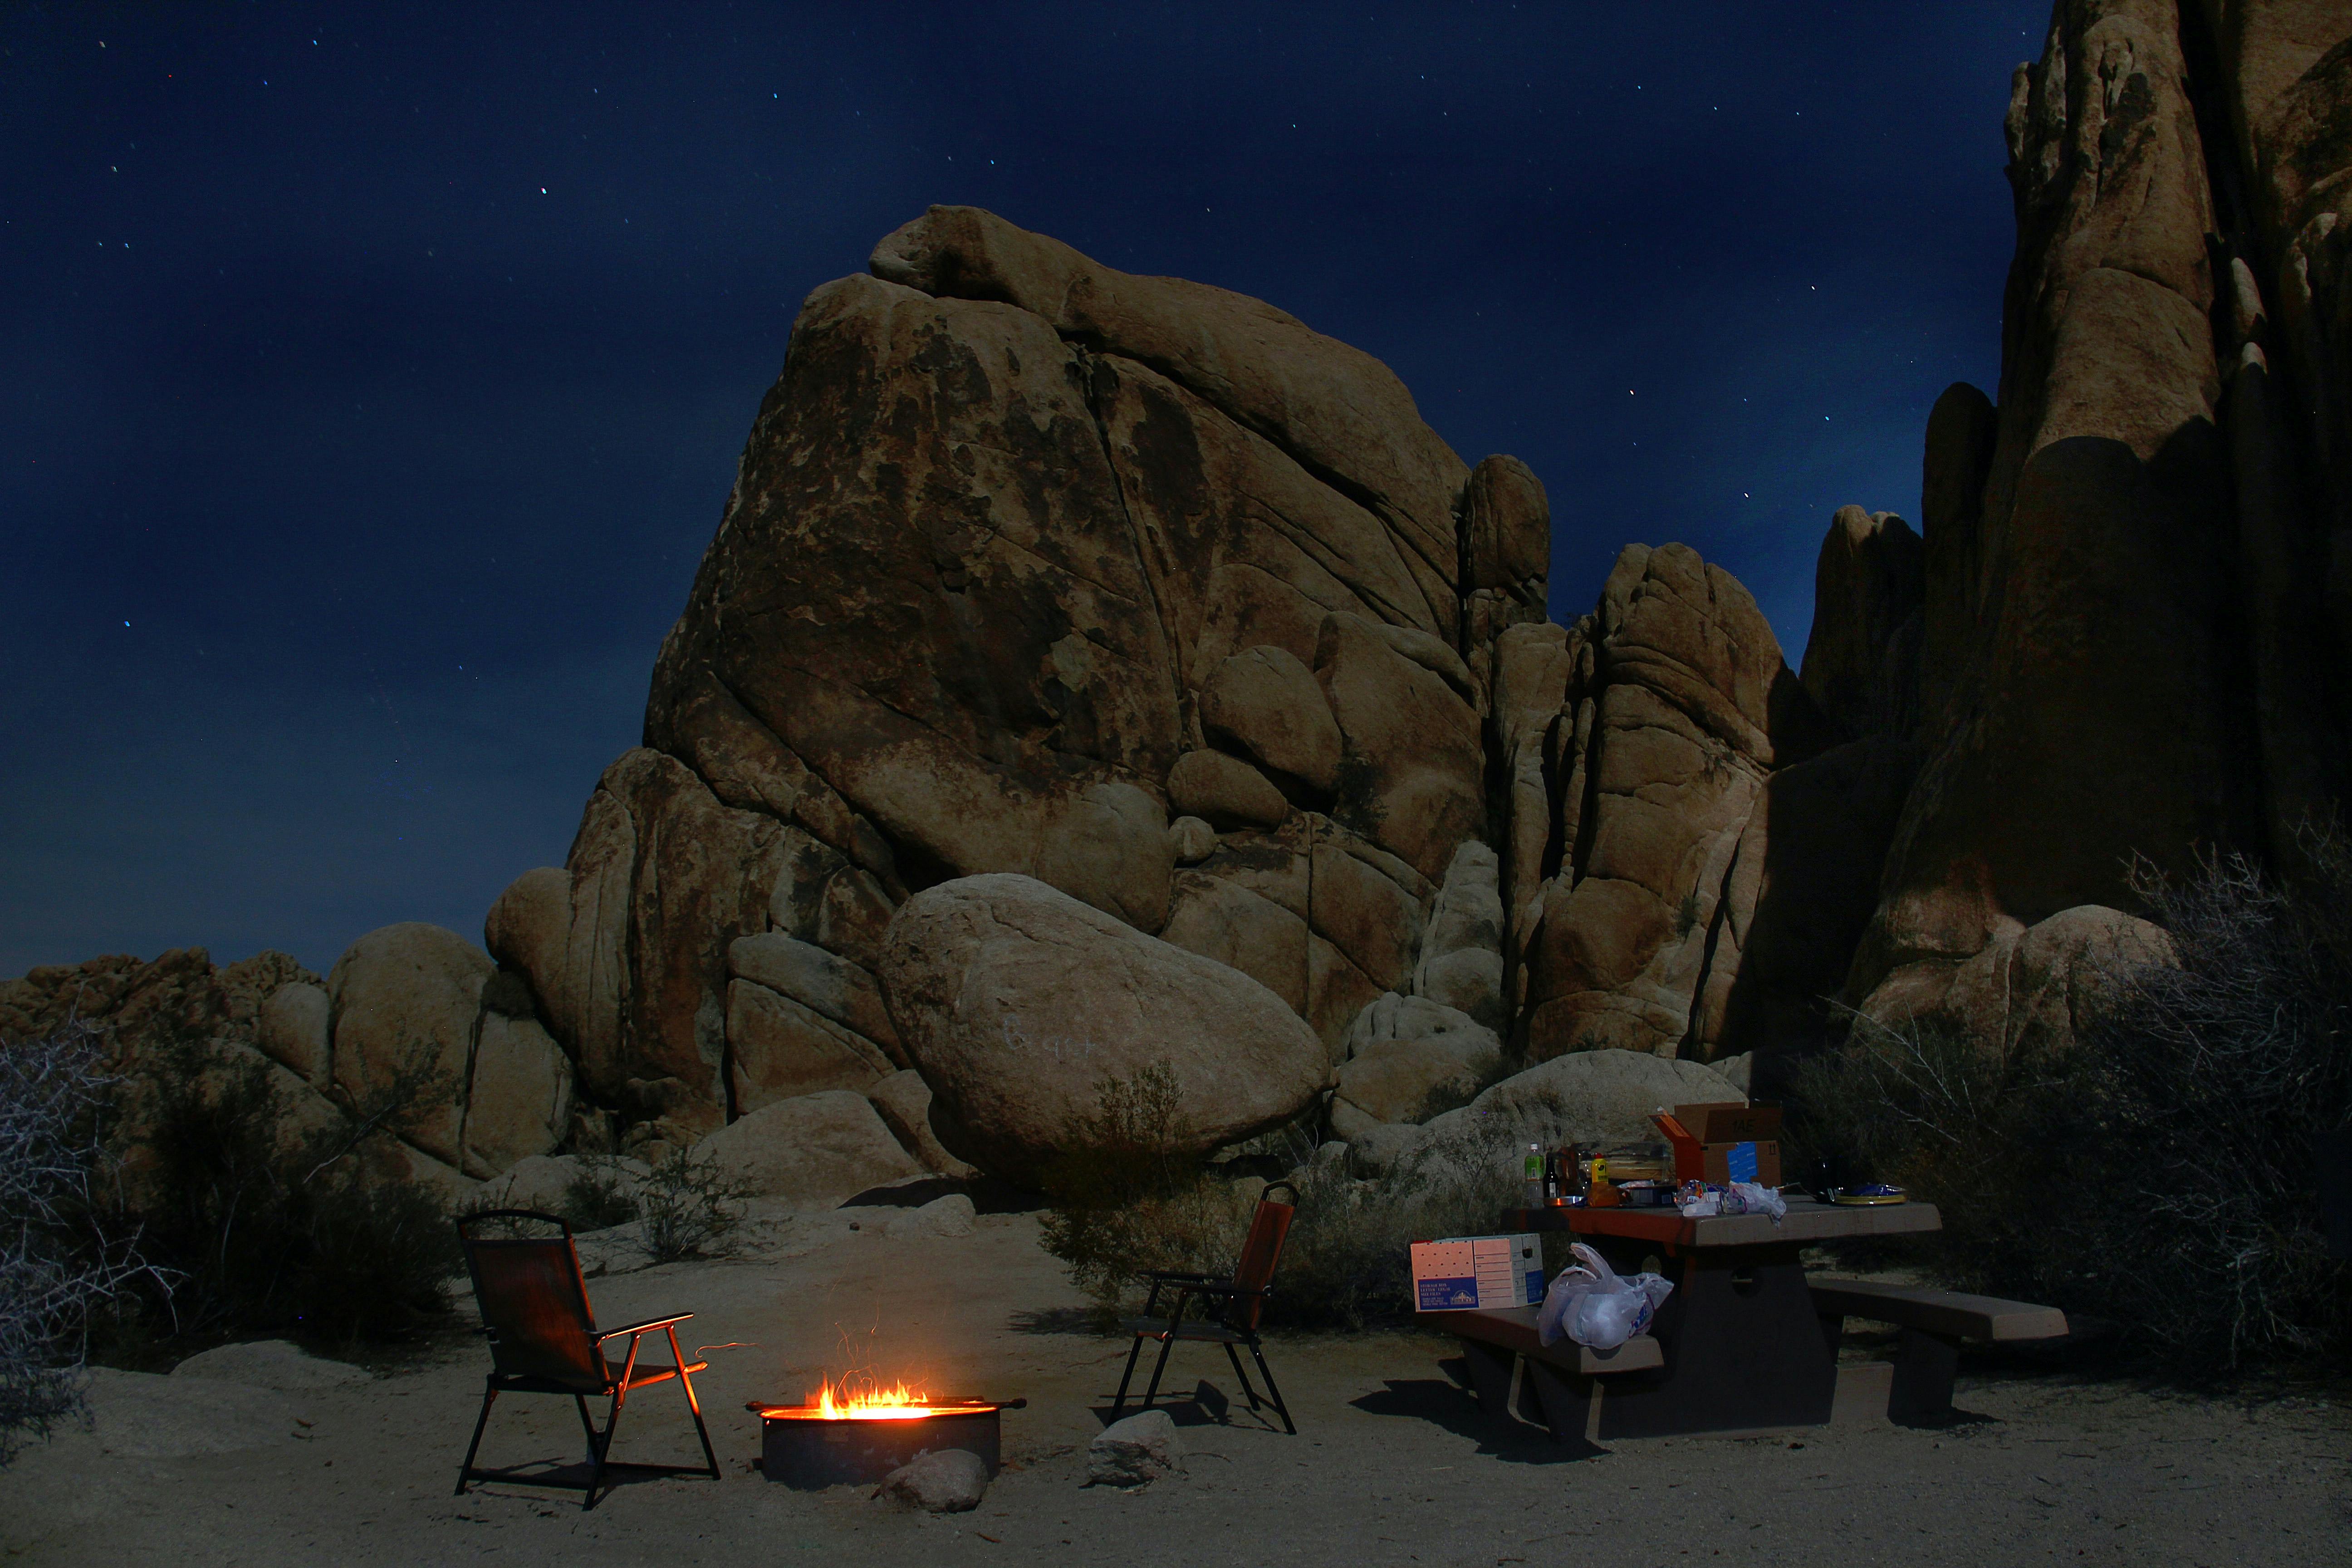 A campsite at night alongside a large rock formation